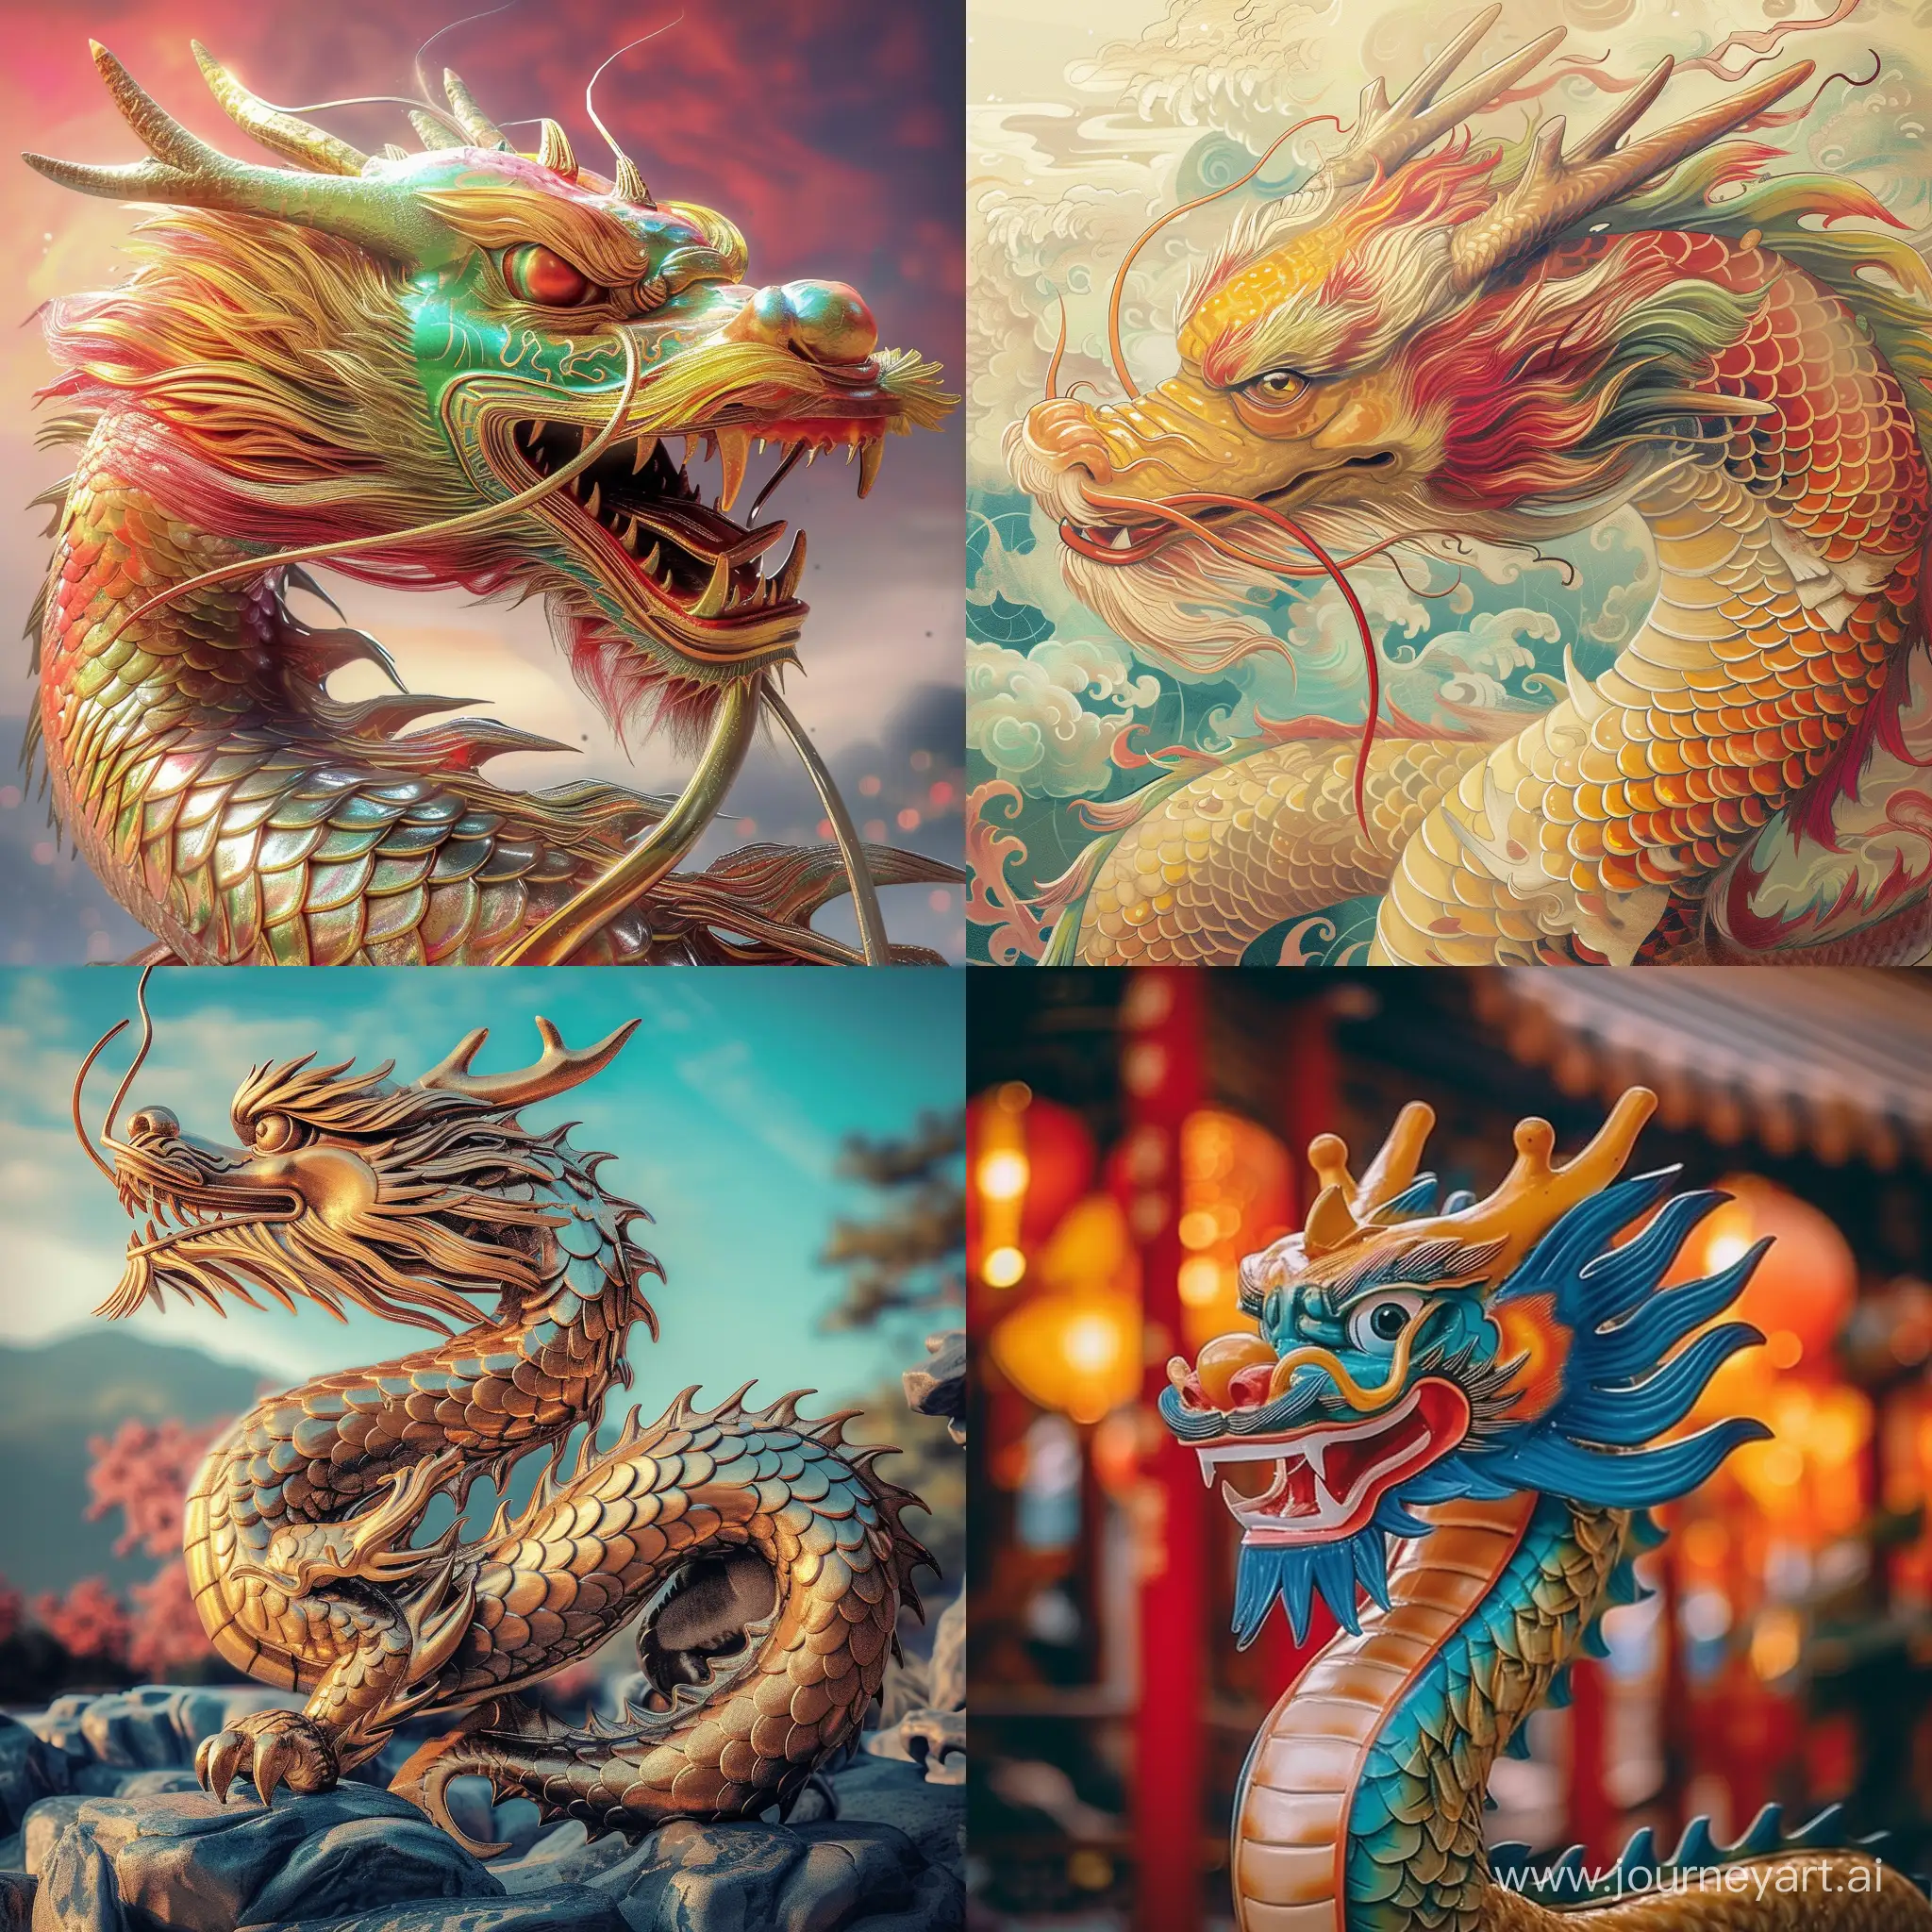 May the power of the Dragon bless us all with success in the year ahead